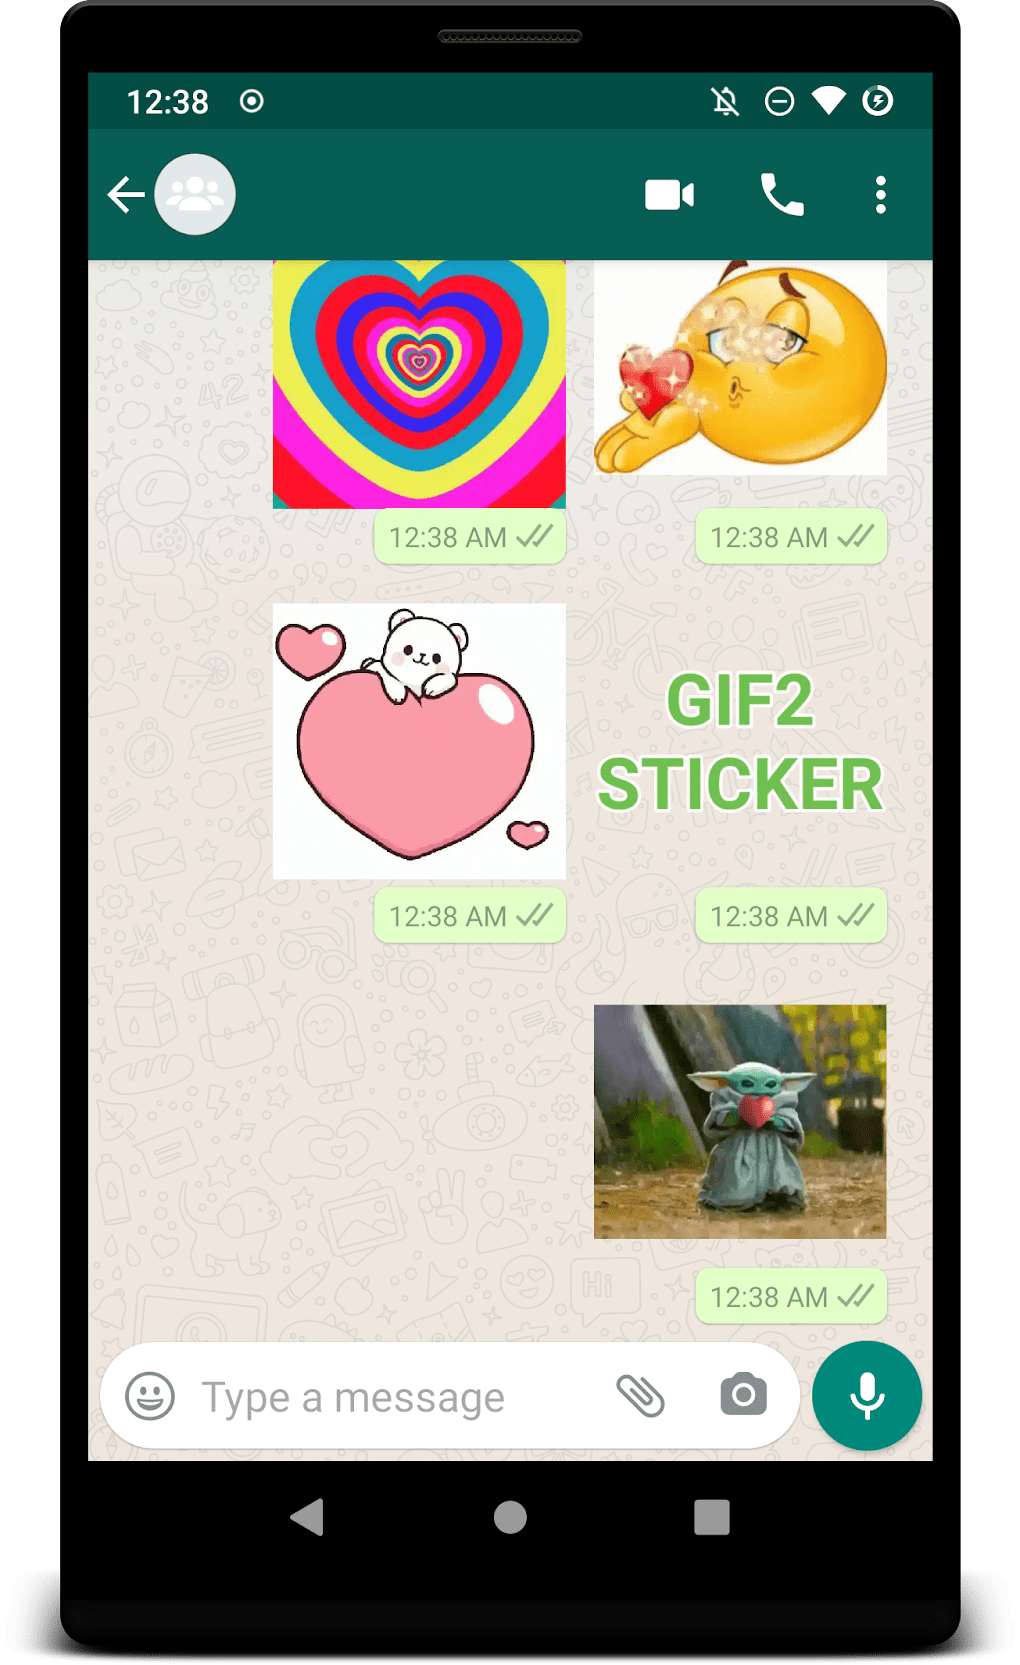 GIF2Sticker - Animated Sticker Maker for WhatsApp para Android - Download